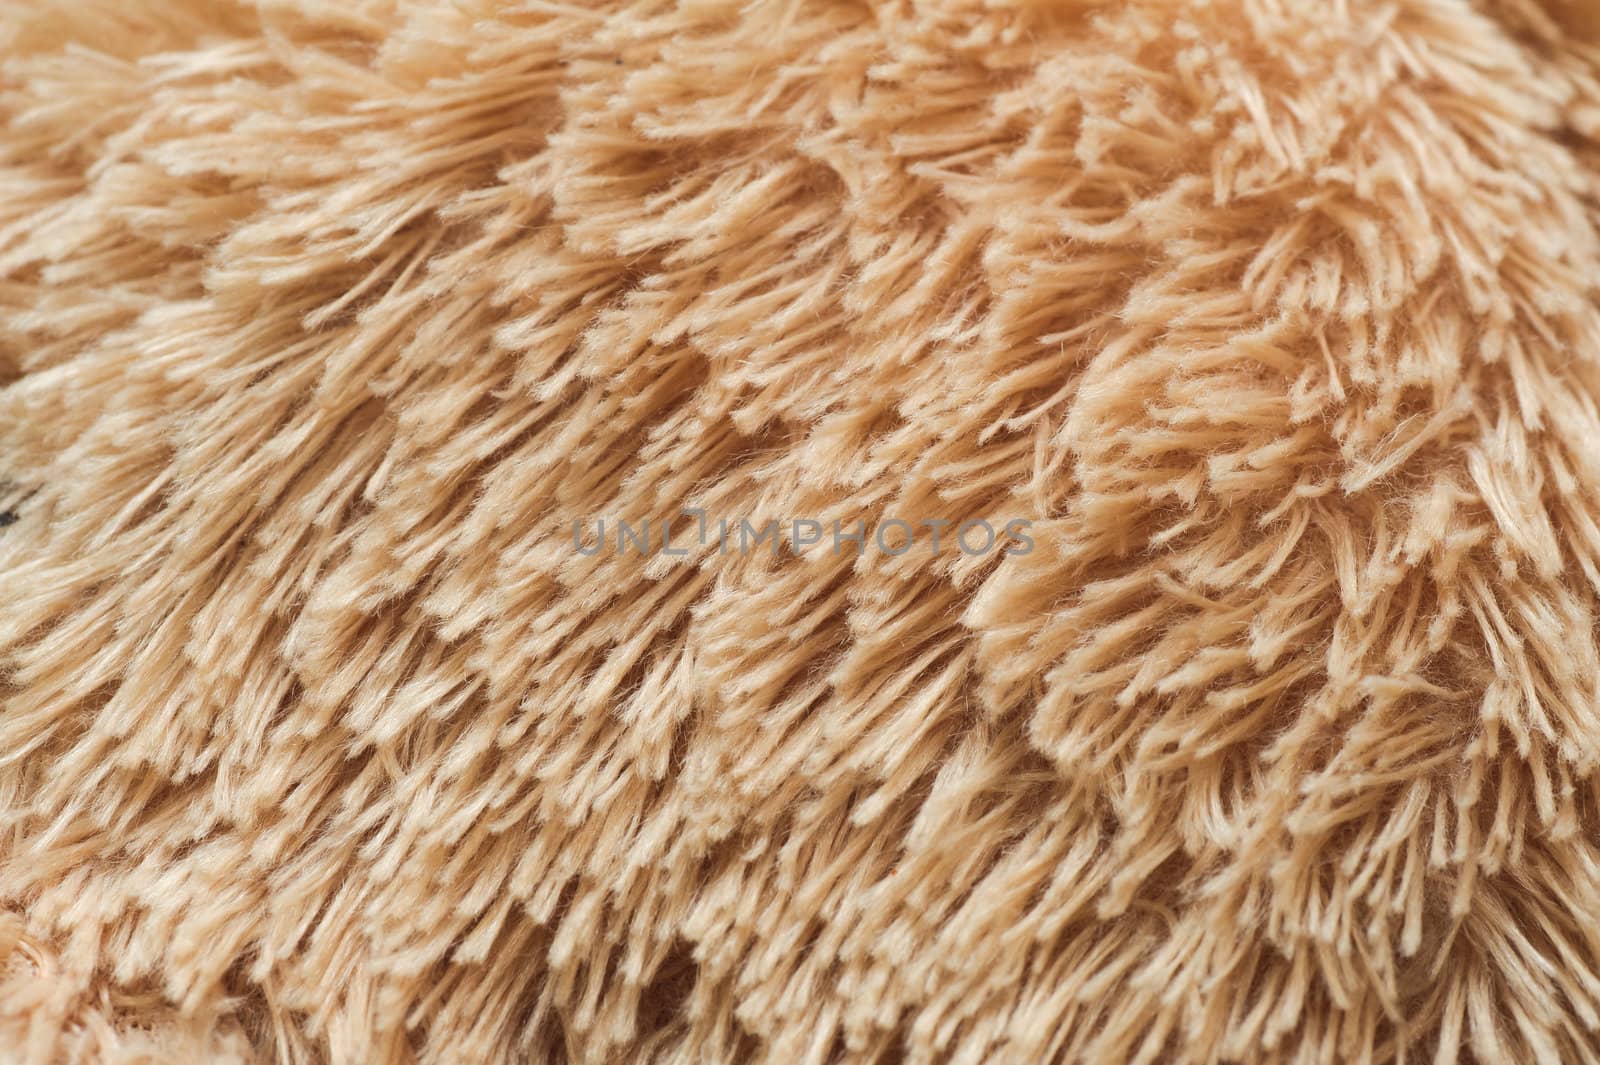 soft hair texture similar to natural wool. artificial fibre background